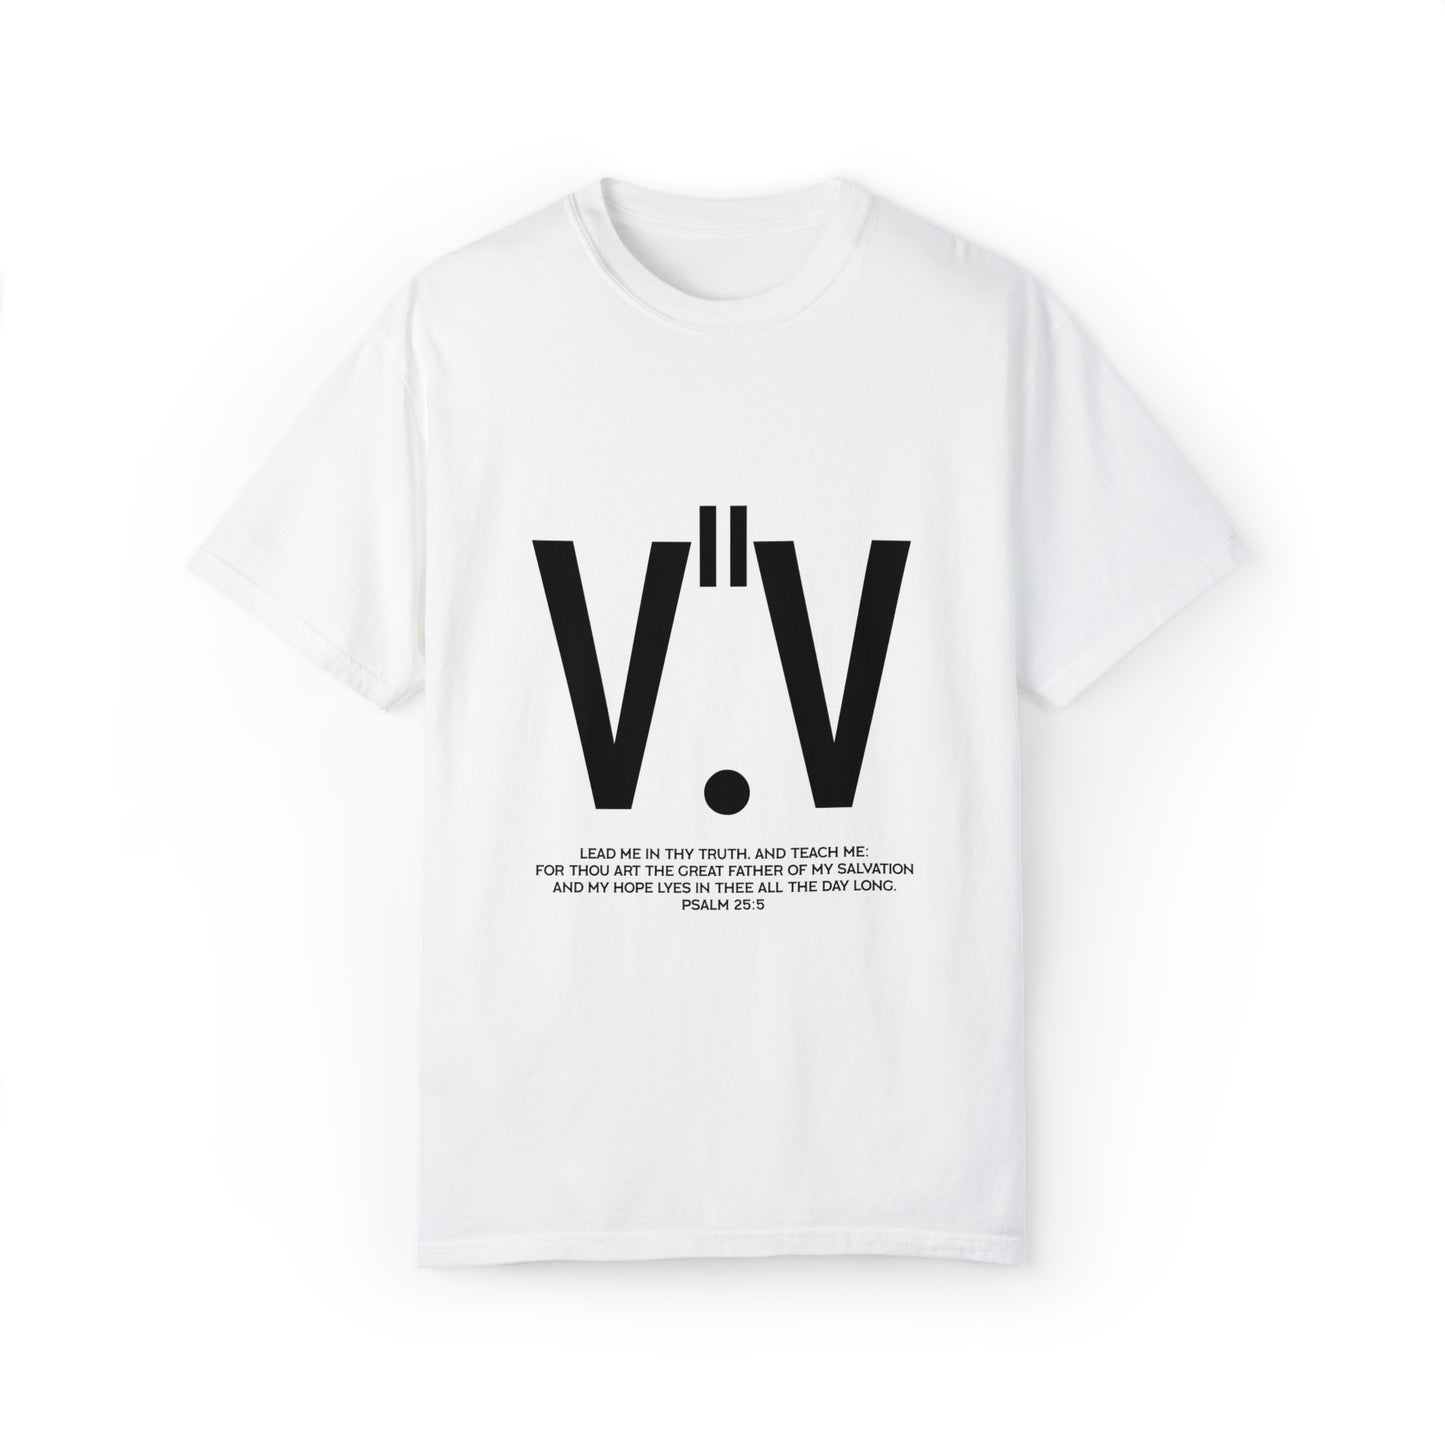 Psalm 25:5 T-shirt roman numerals with quote